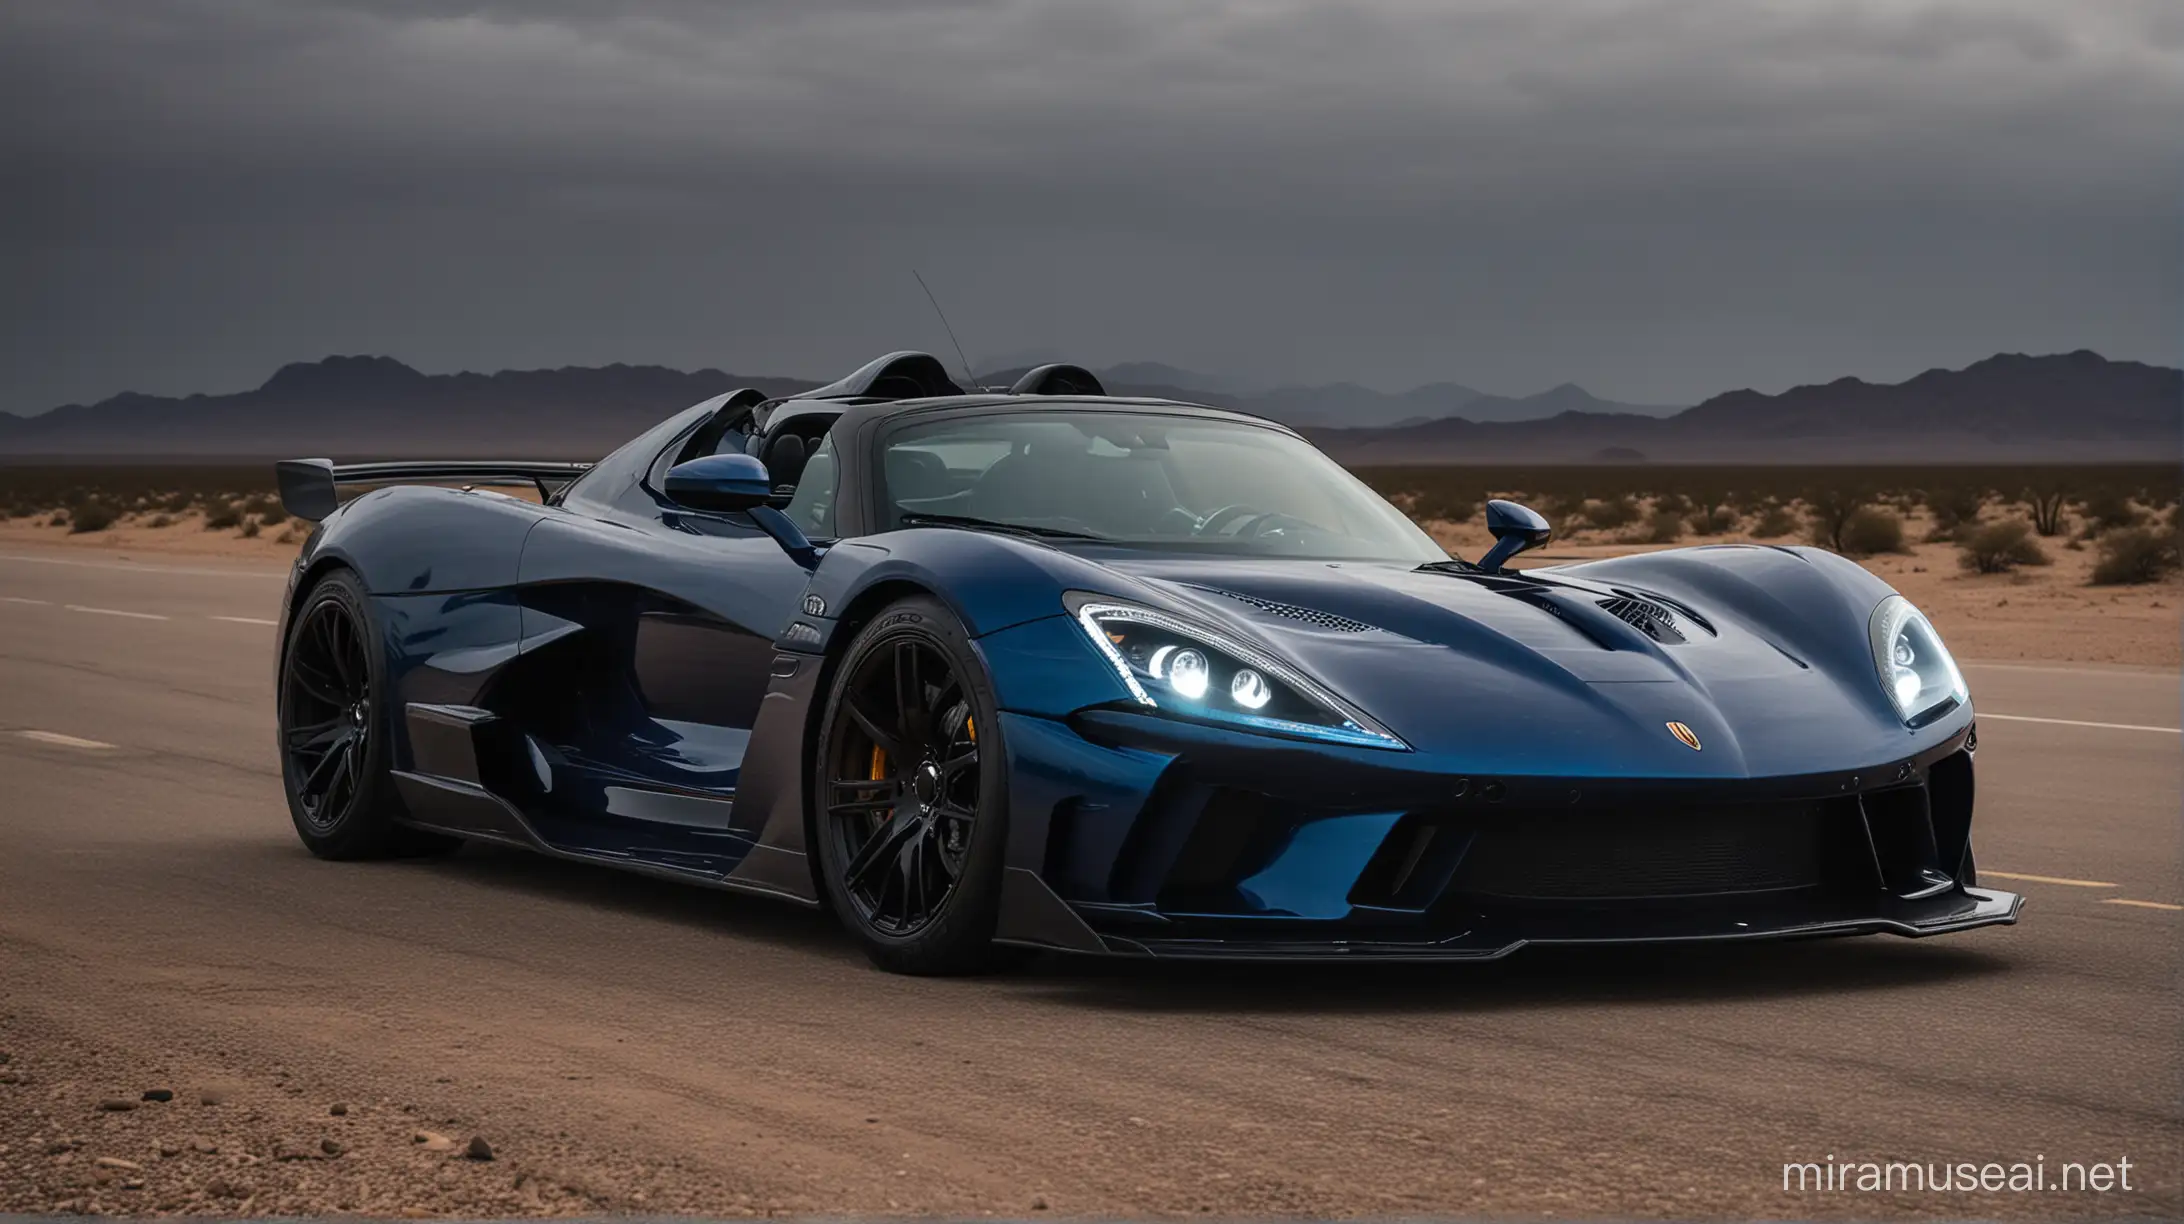 Against the background of a gloomy night, deep in the heart of a silent desert, peace breathes heavily. Suddenly, a dark blue Hennessey Venom F5 Roadster bursts out of the darkness, looking like a gladiator ready for battle. Standing in front of the road, it faces the future, its powerful headlights cutting through the darkness, illuminating the path ahead. It seems that time freezes in anticipation of the moment when this beast will pounce on its prey, instantly disappearing into the night. The world around is filled with expectation; the desert is watching this performance of power and beauty with bated breath.